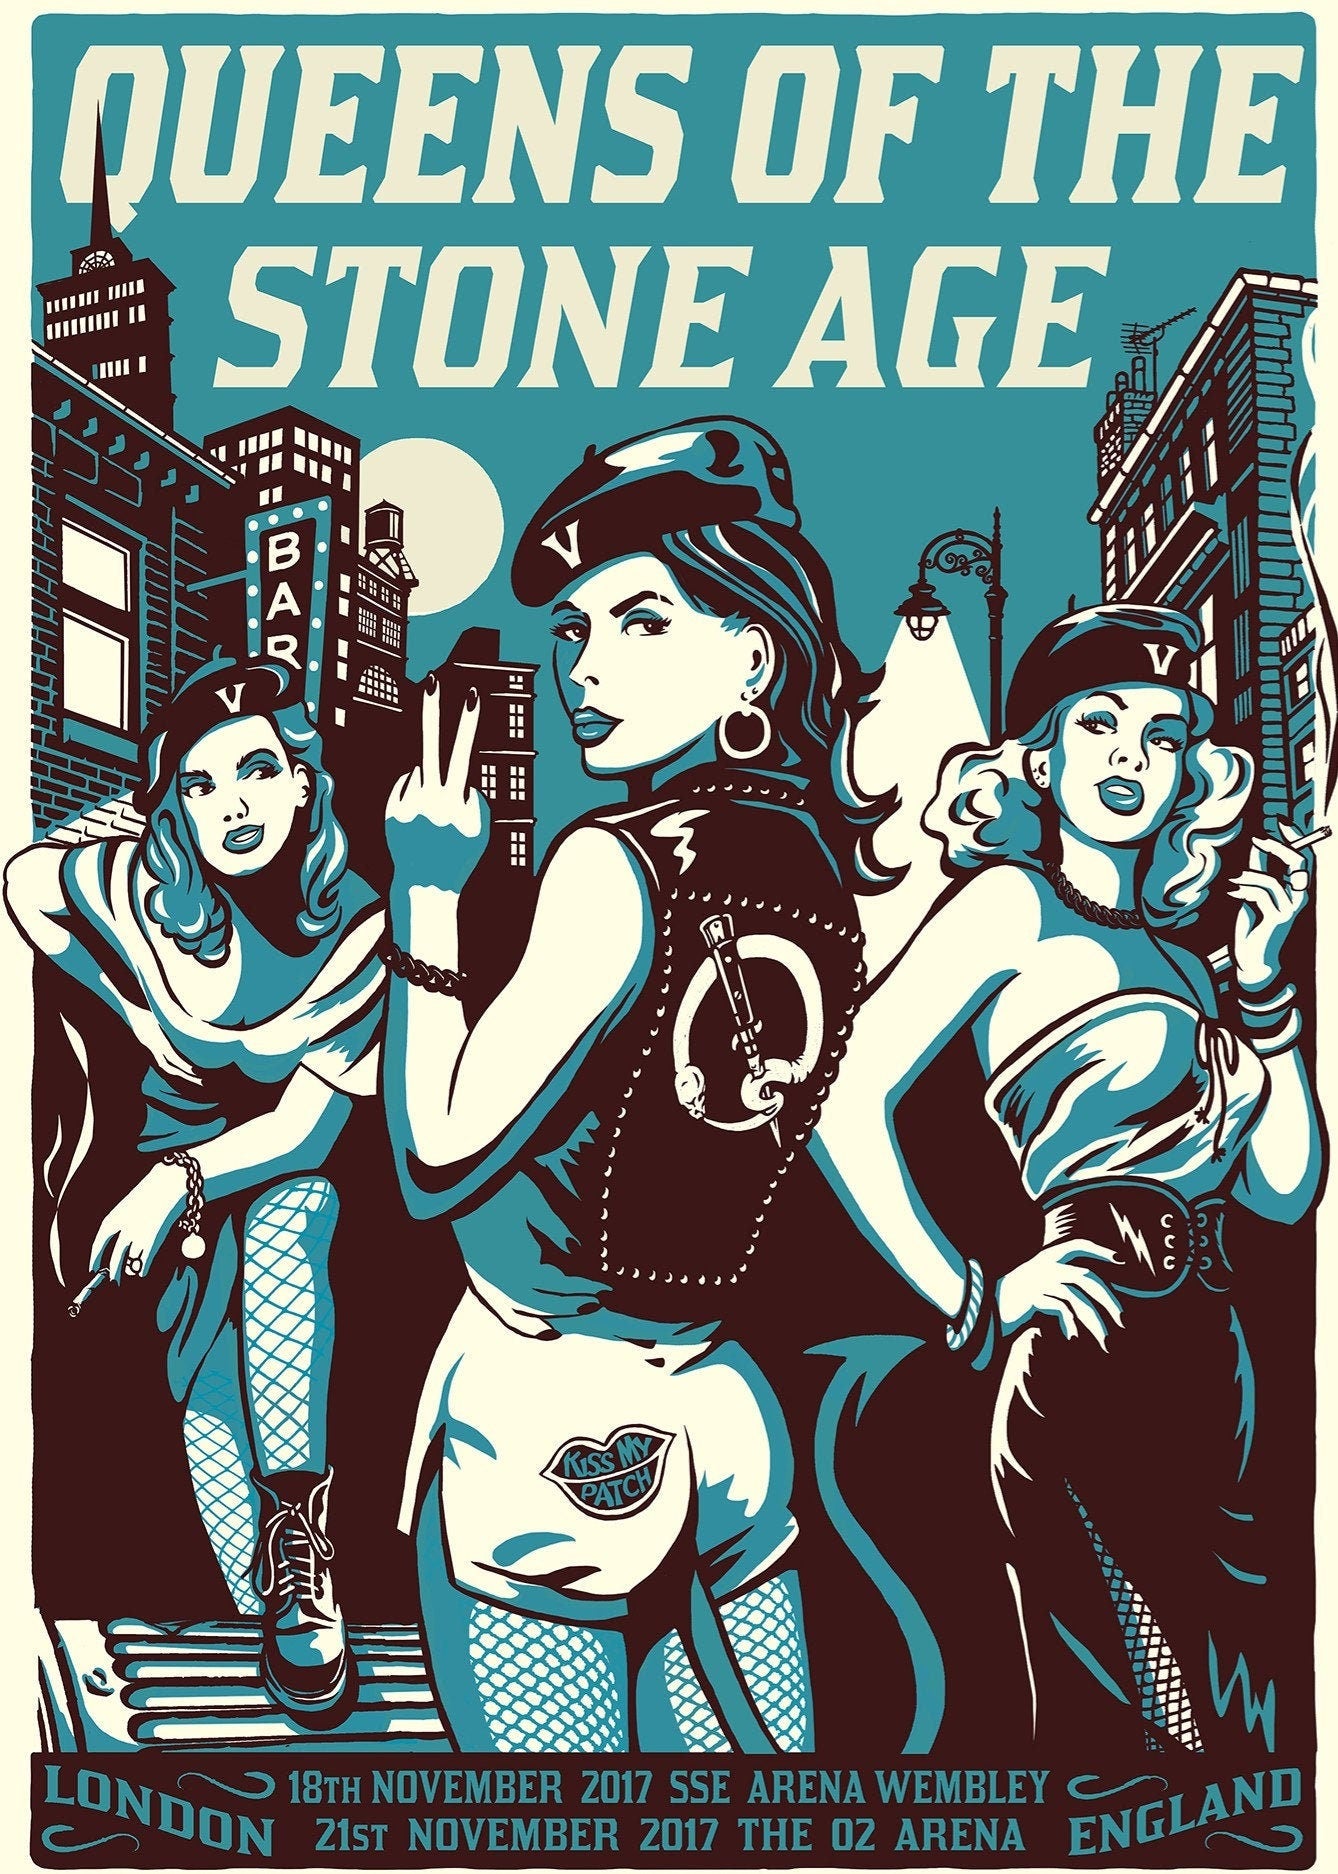 Queens of the Stone Age London Concert Poster Re print  (5501)